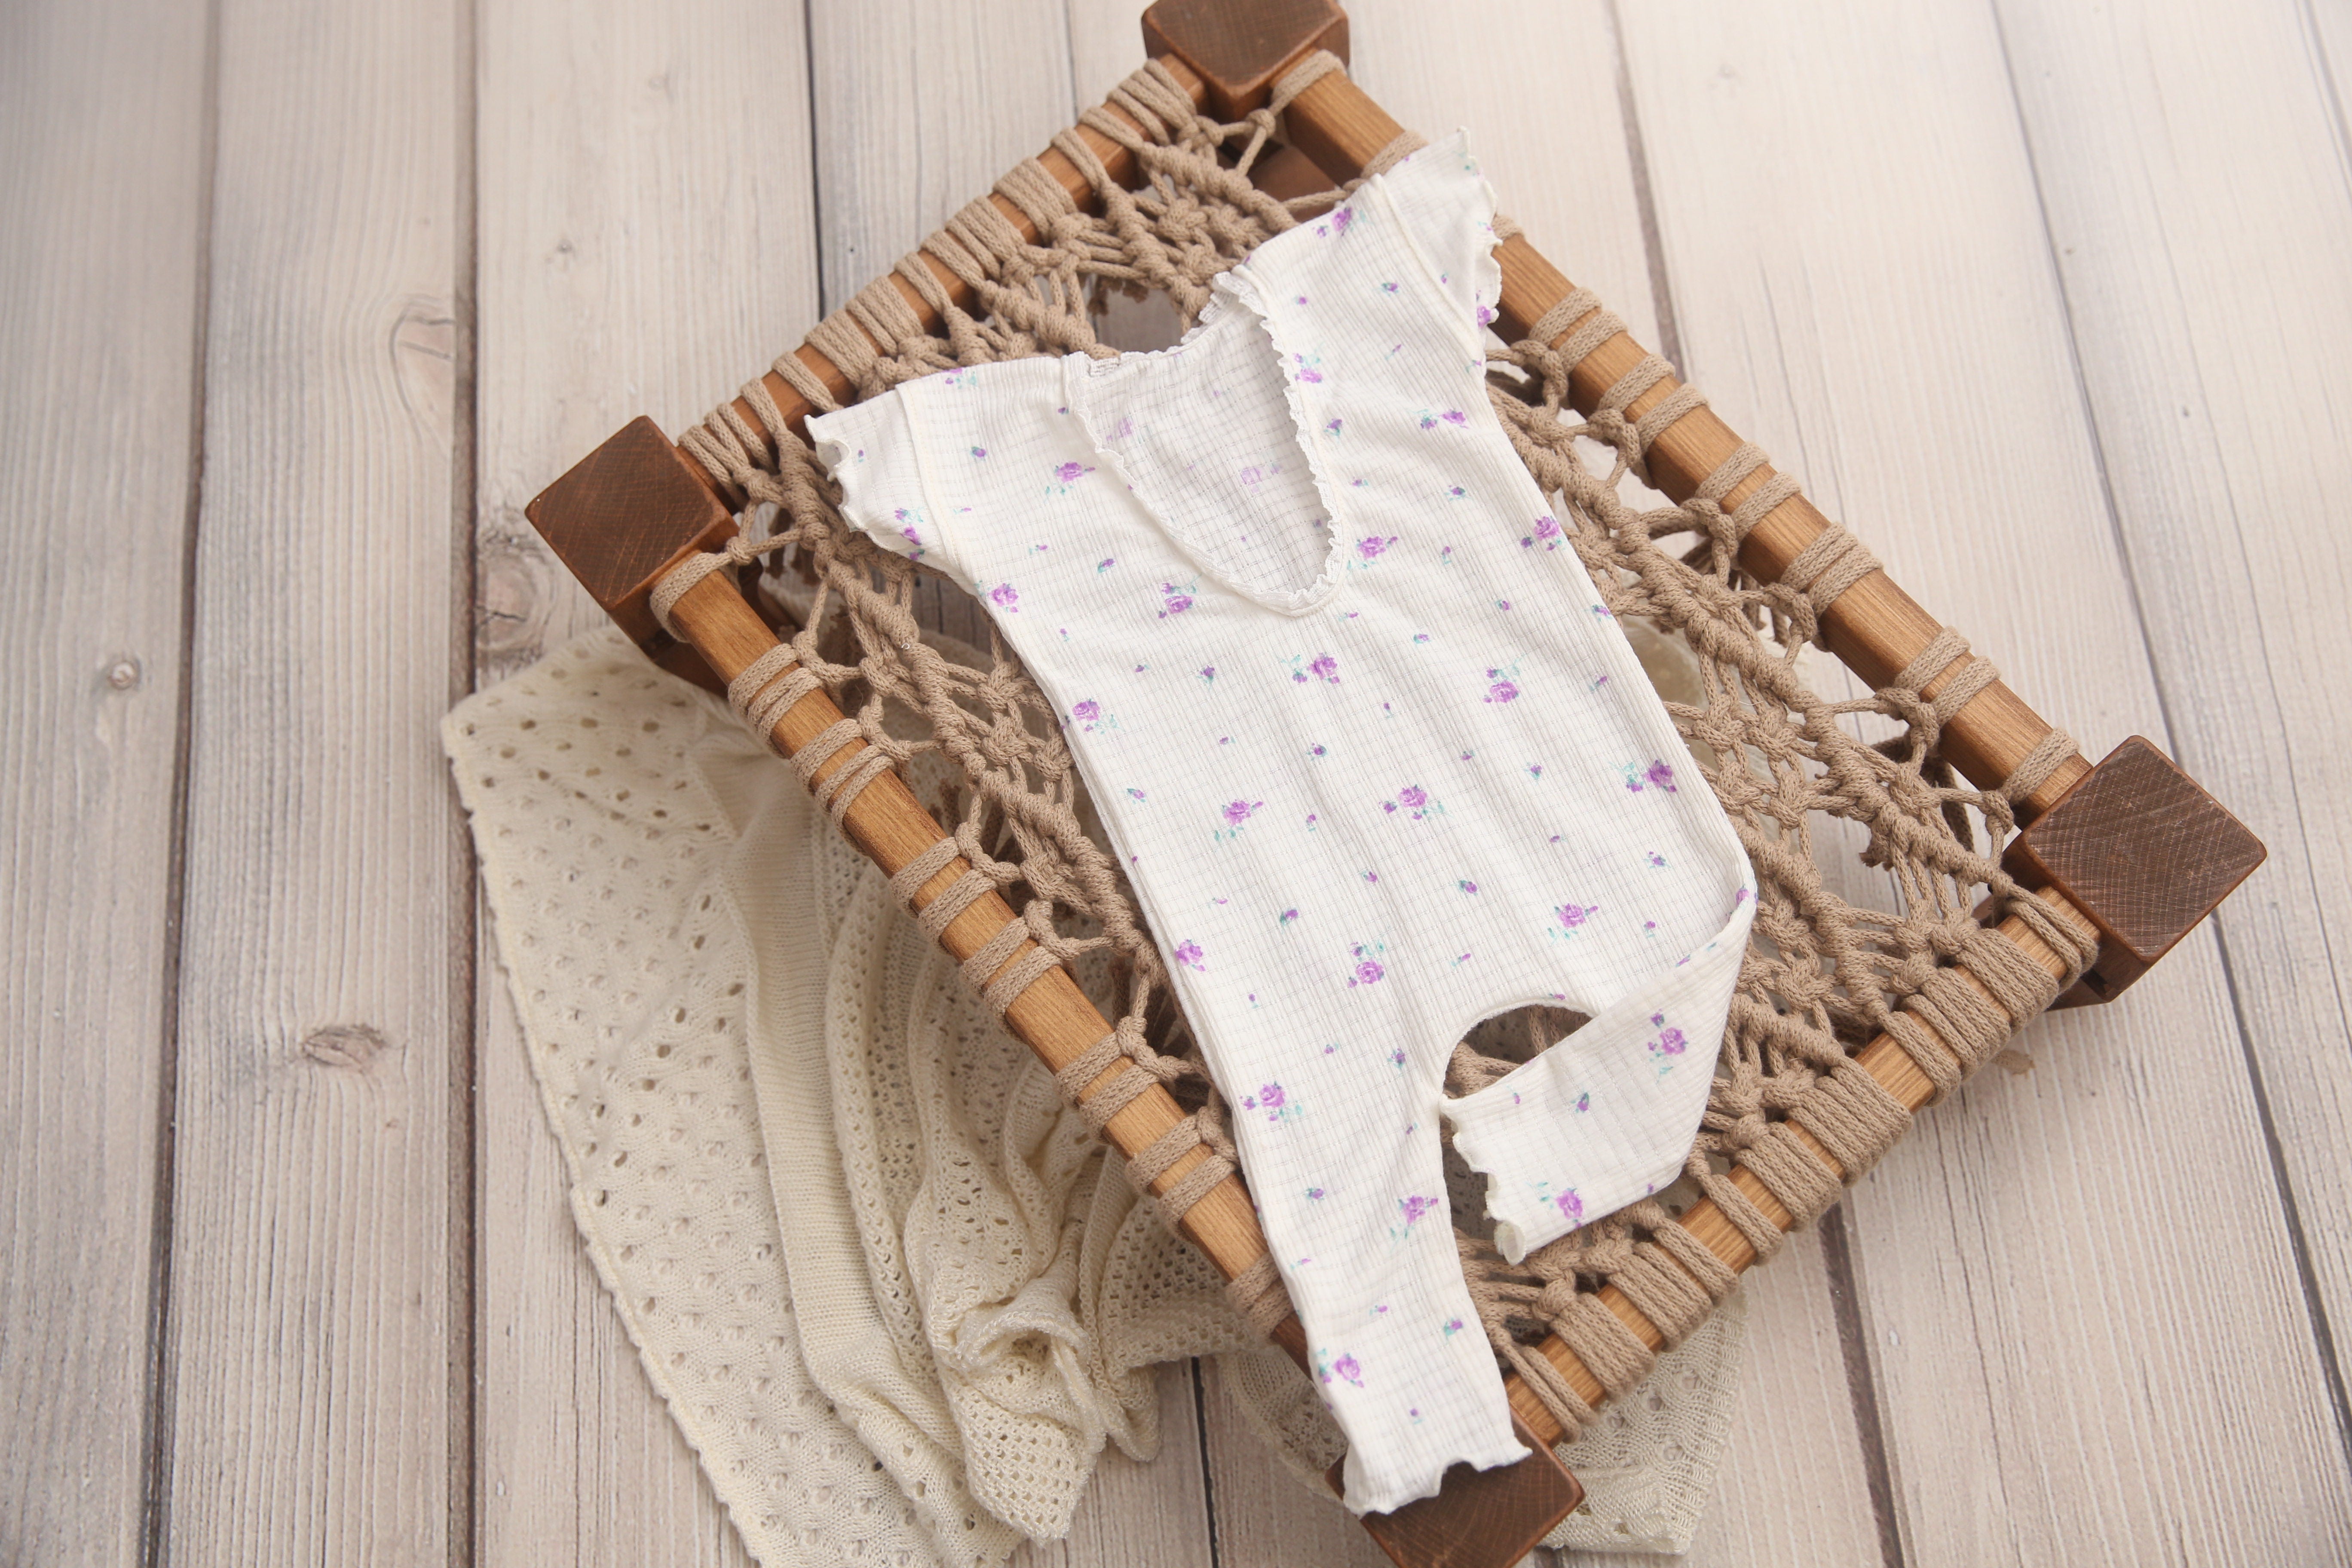 Newborn Madelyn Romper- Dainty Plum- MADE TO ORDER